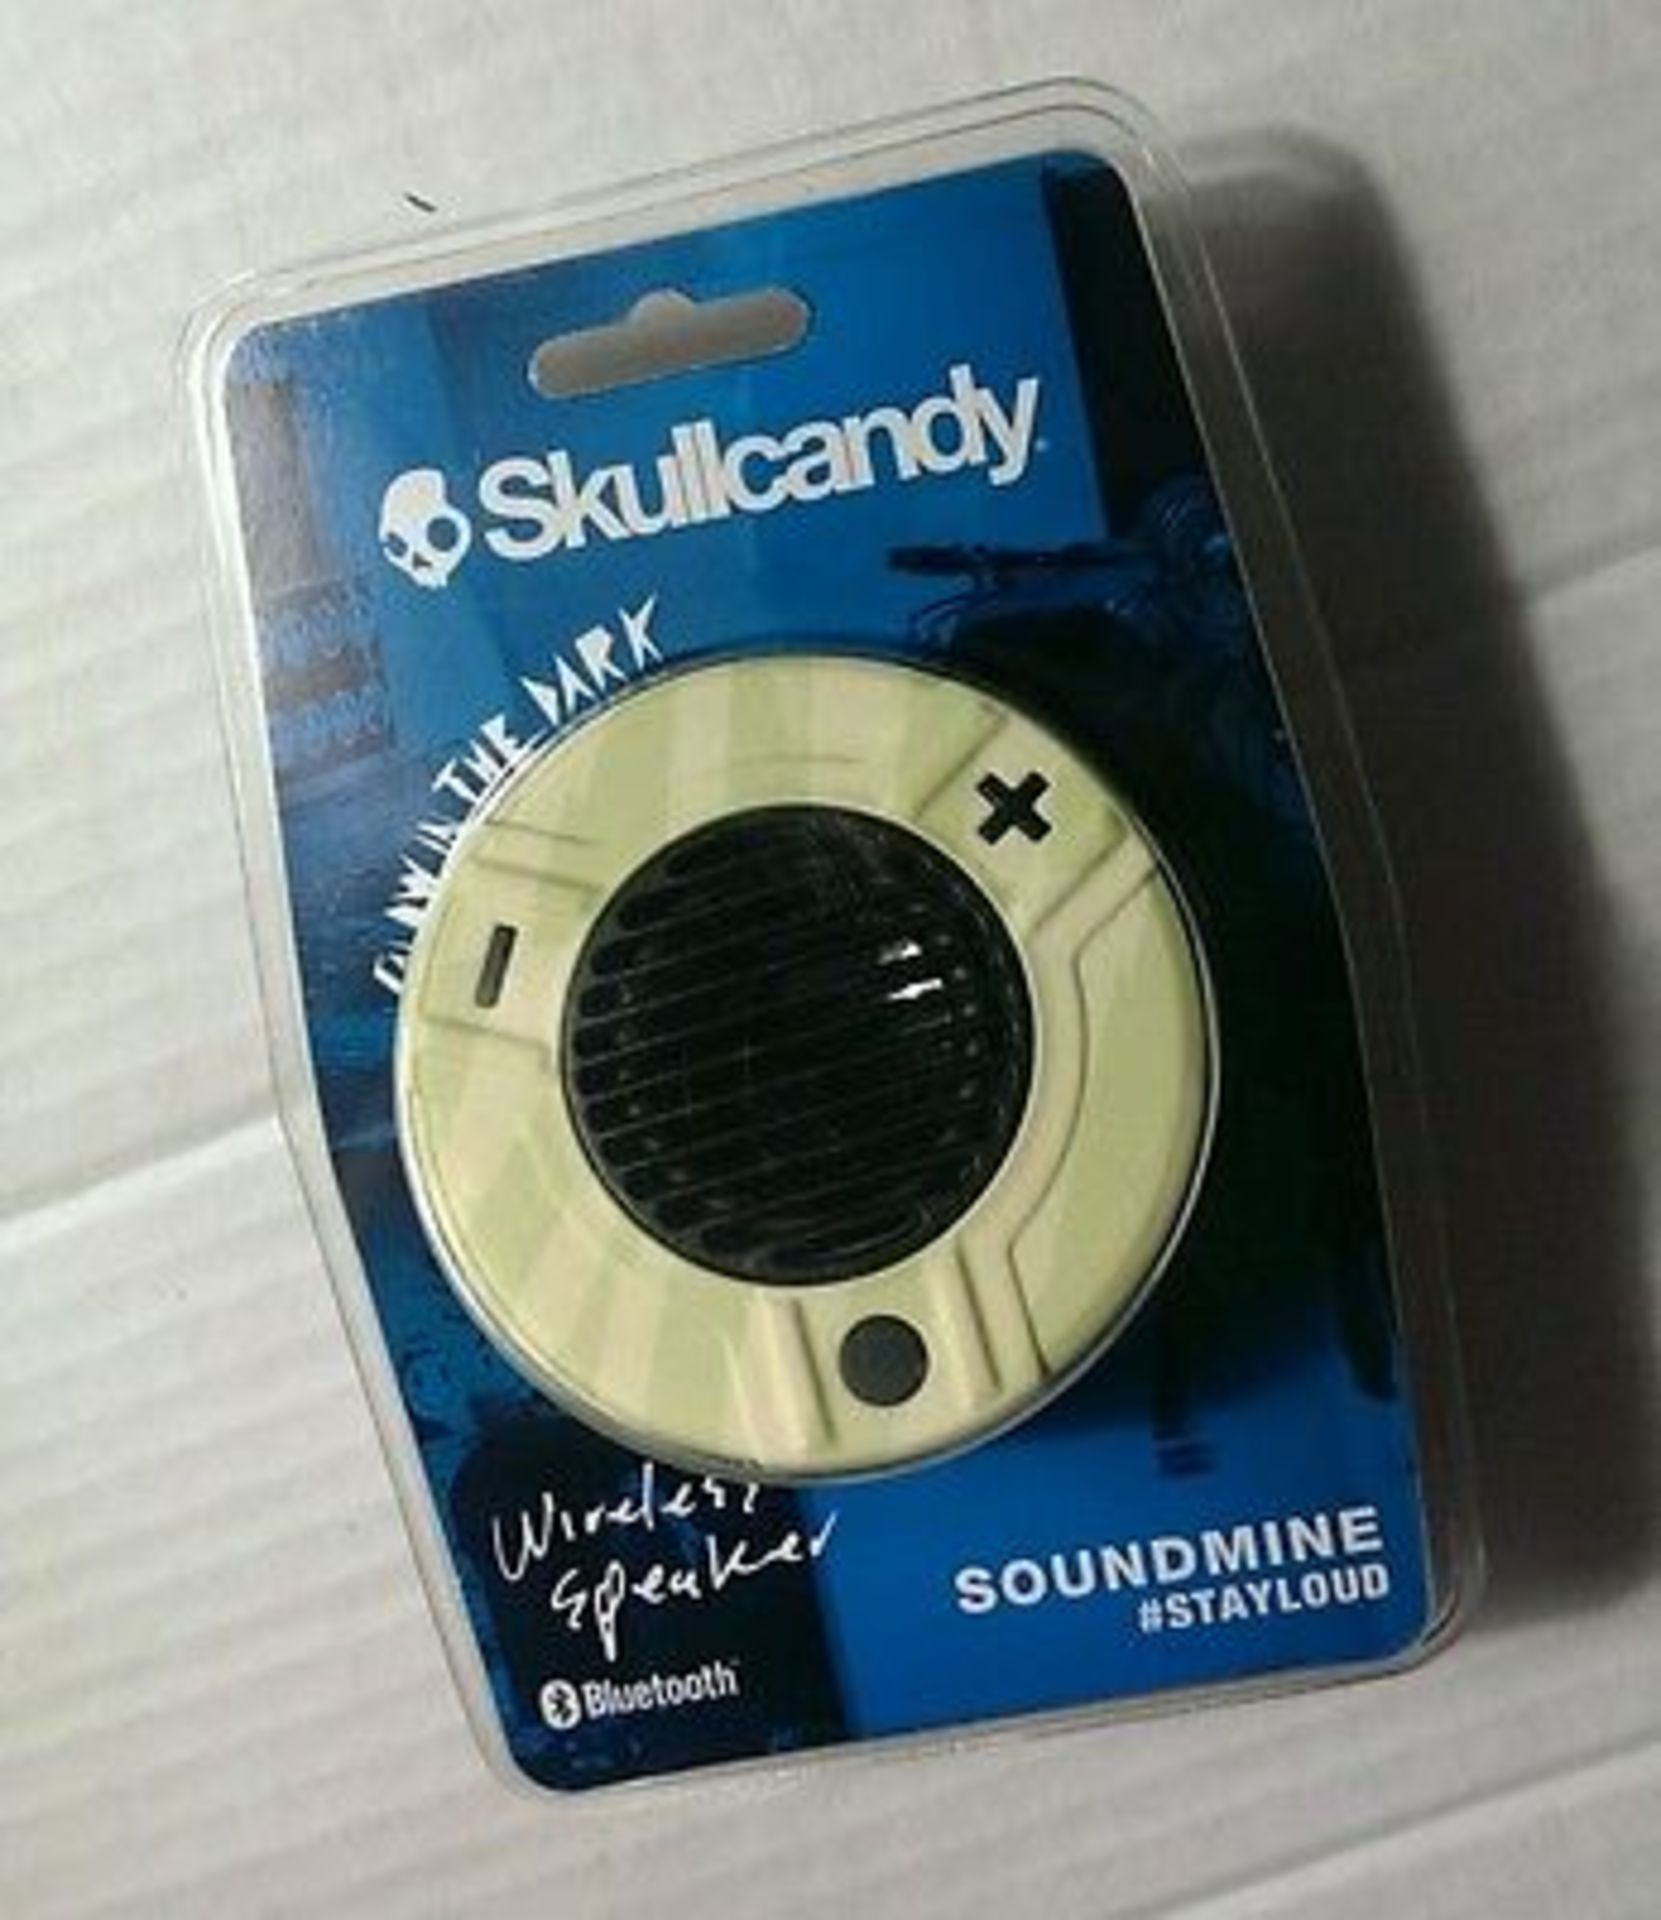 V *TRADE QTY* Brand New Skullcandy Glow in The Dark Wireless Speaker - Blutooth Connection - Drop